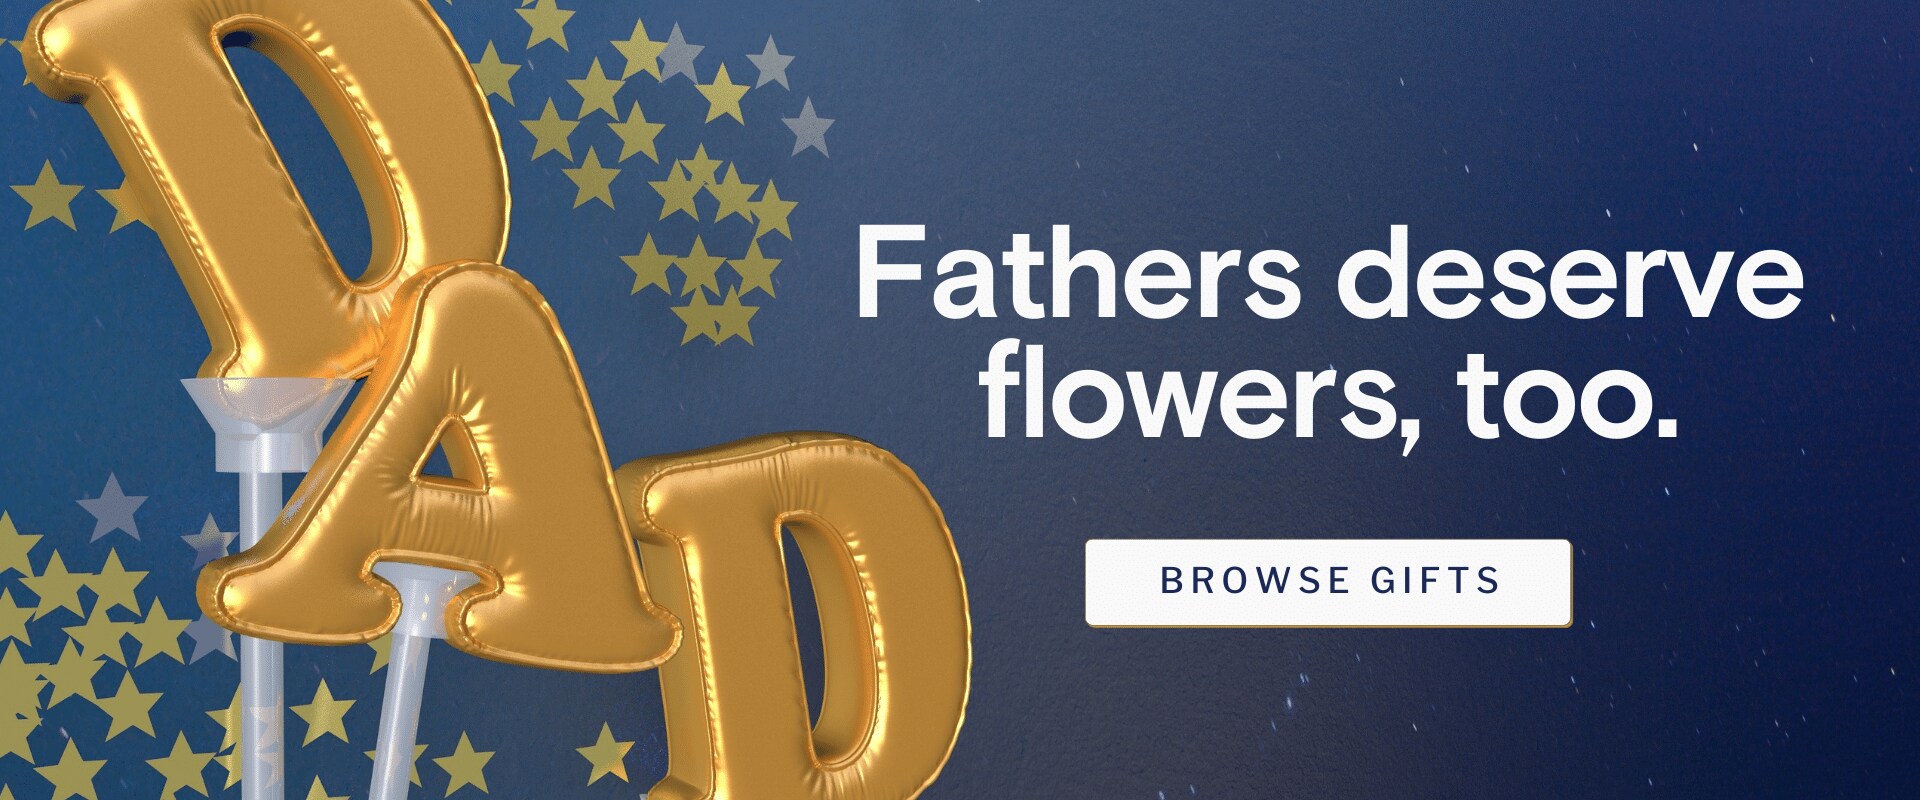 Fathers deserve flowers too